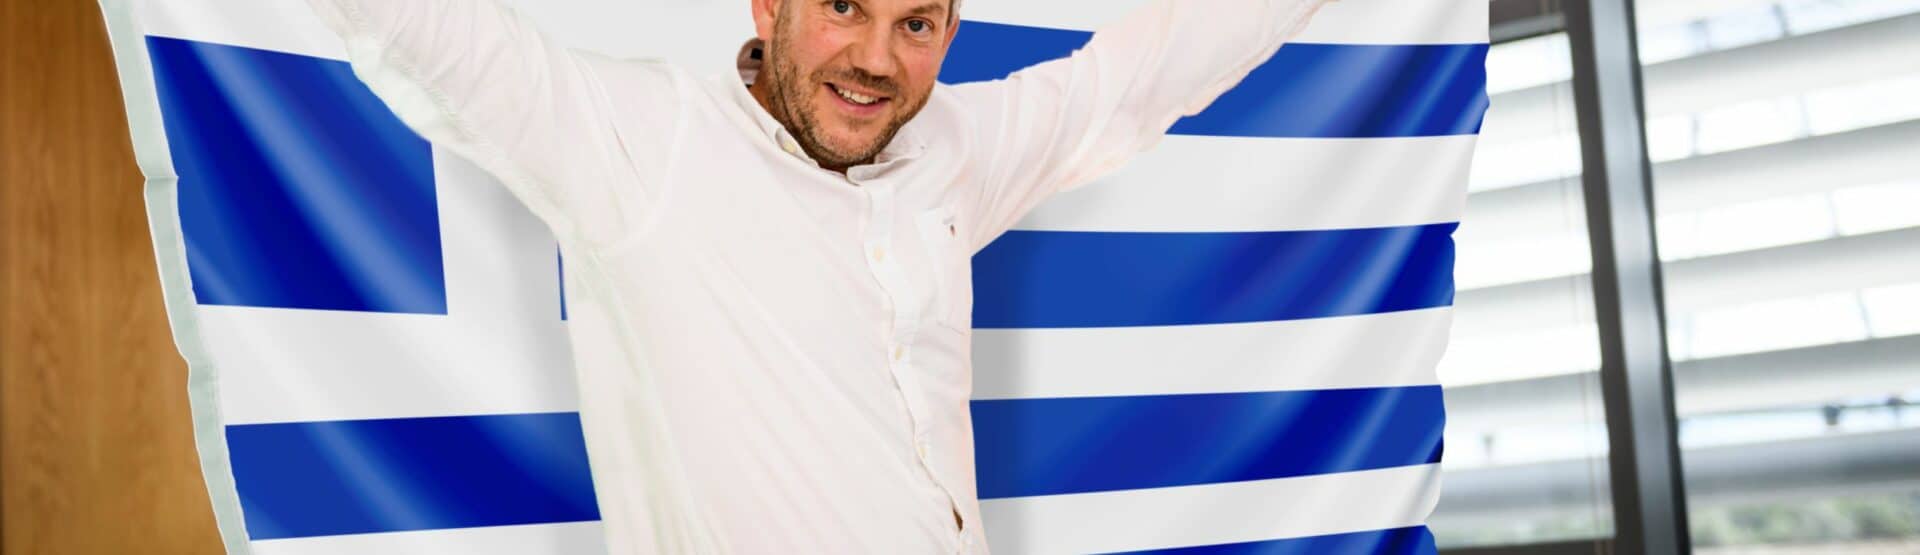 Dan Cook, Operations Director at Europa Worldwide Group, holding a Greek flag.